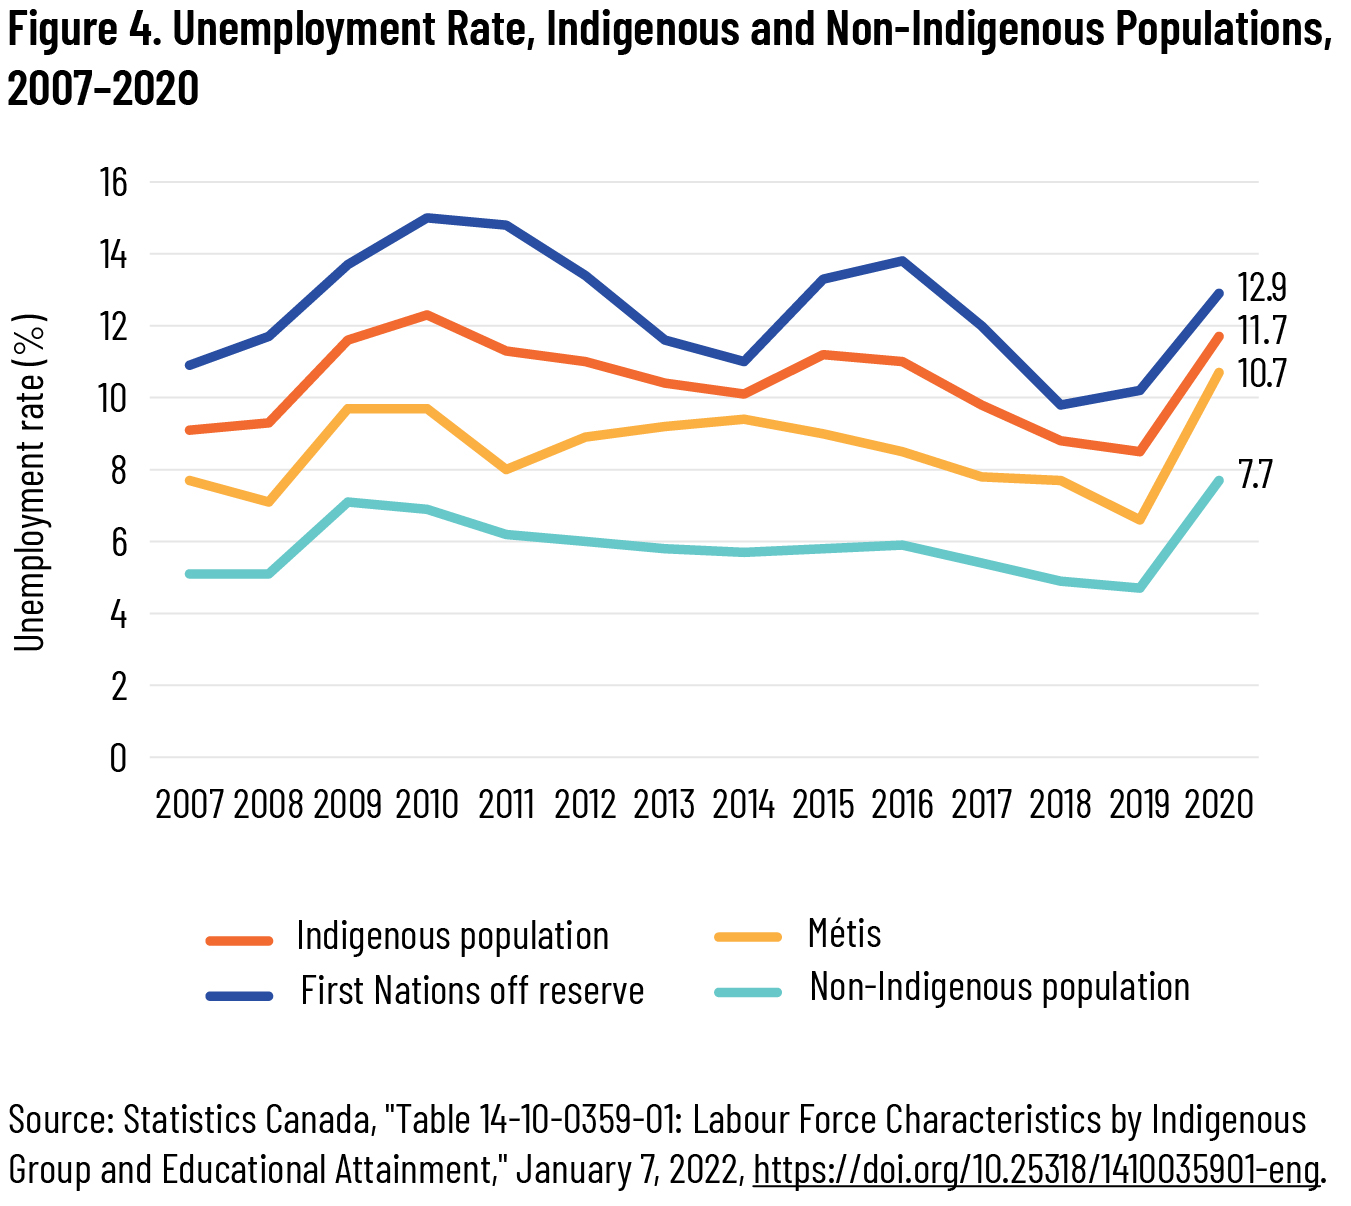 Figure 4. Unemployment Rate, Indigenous and Non-Indigenous Populations, 2007-2020